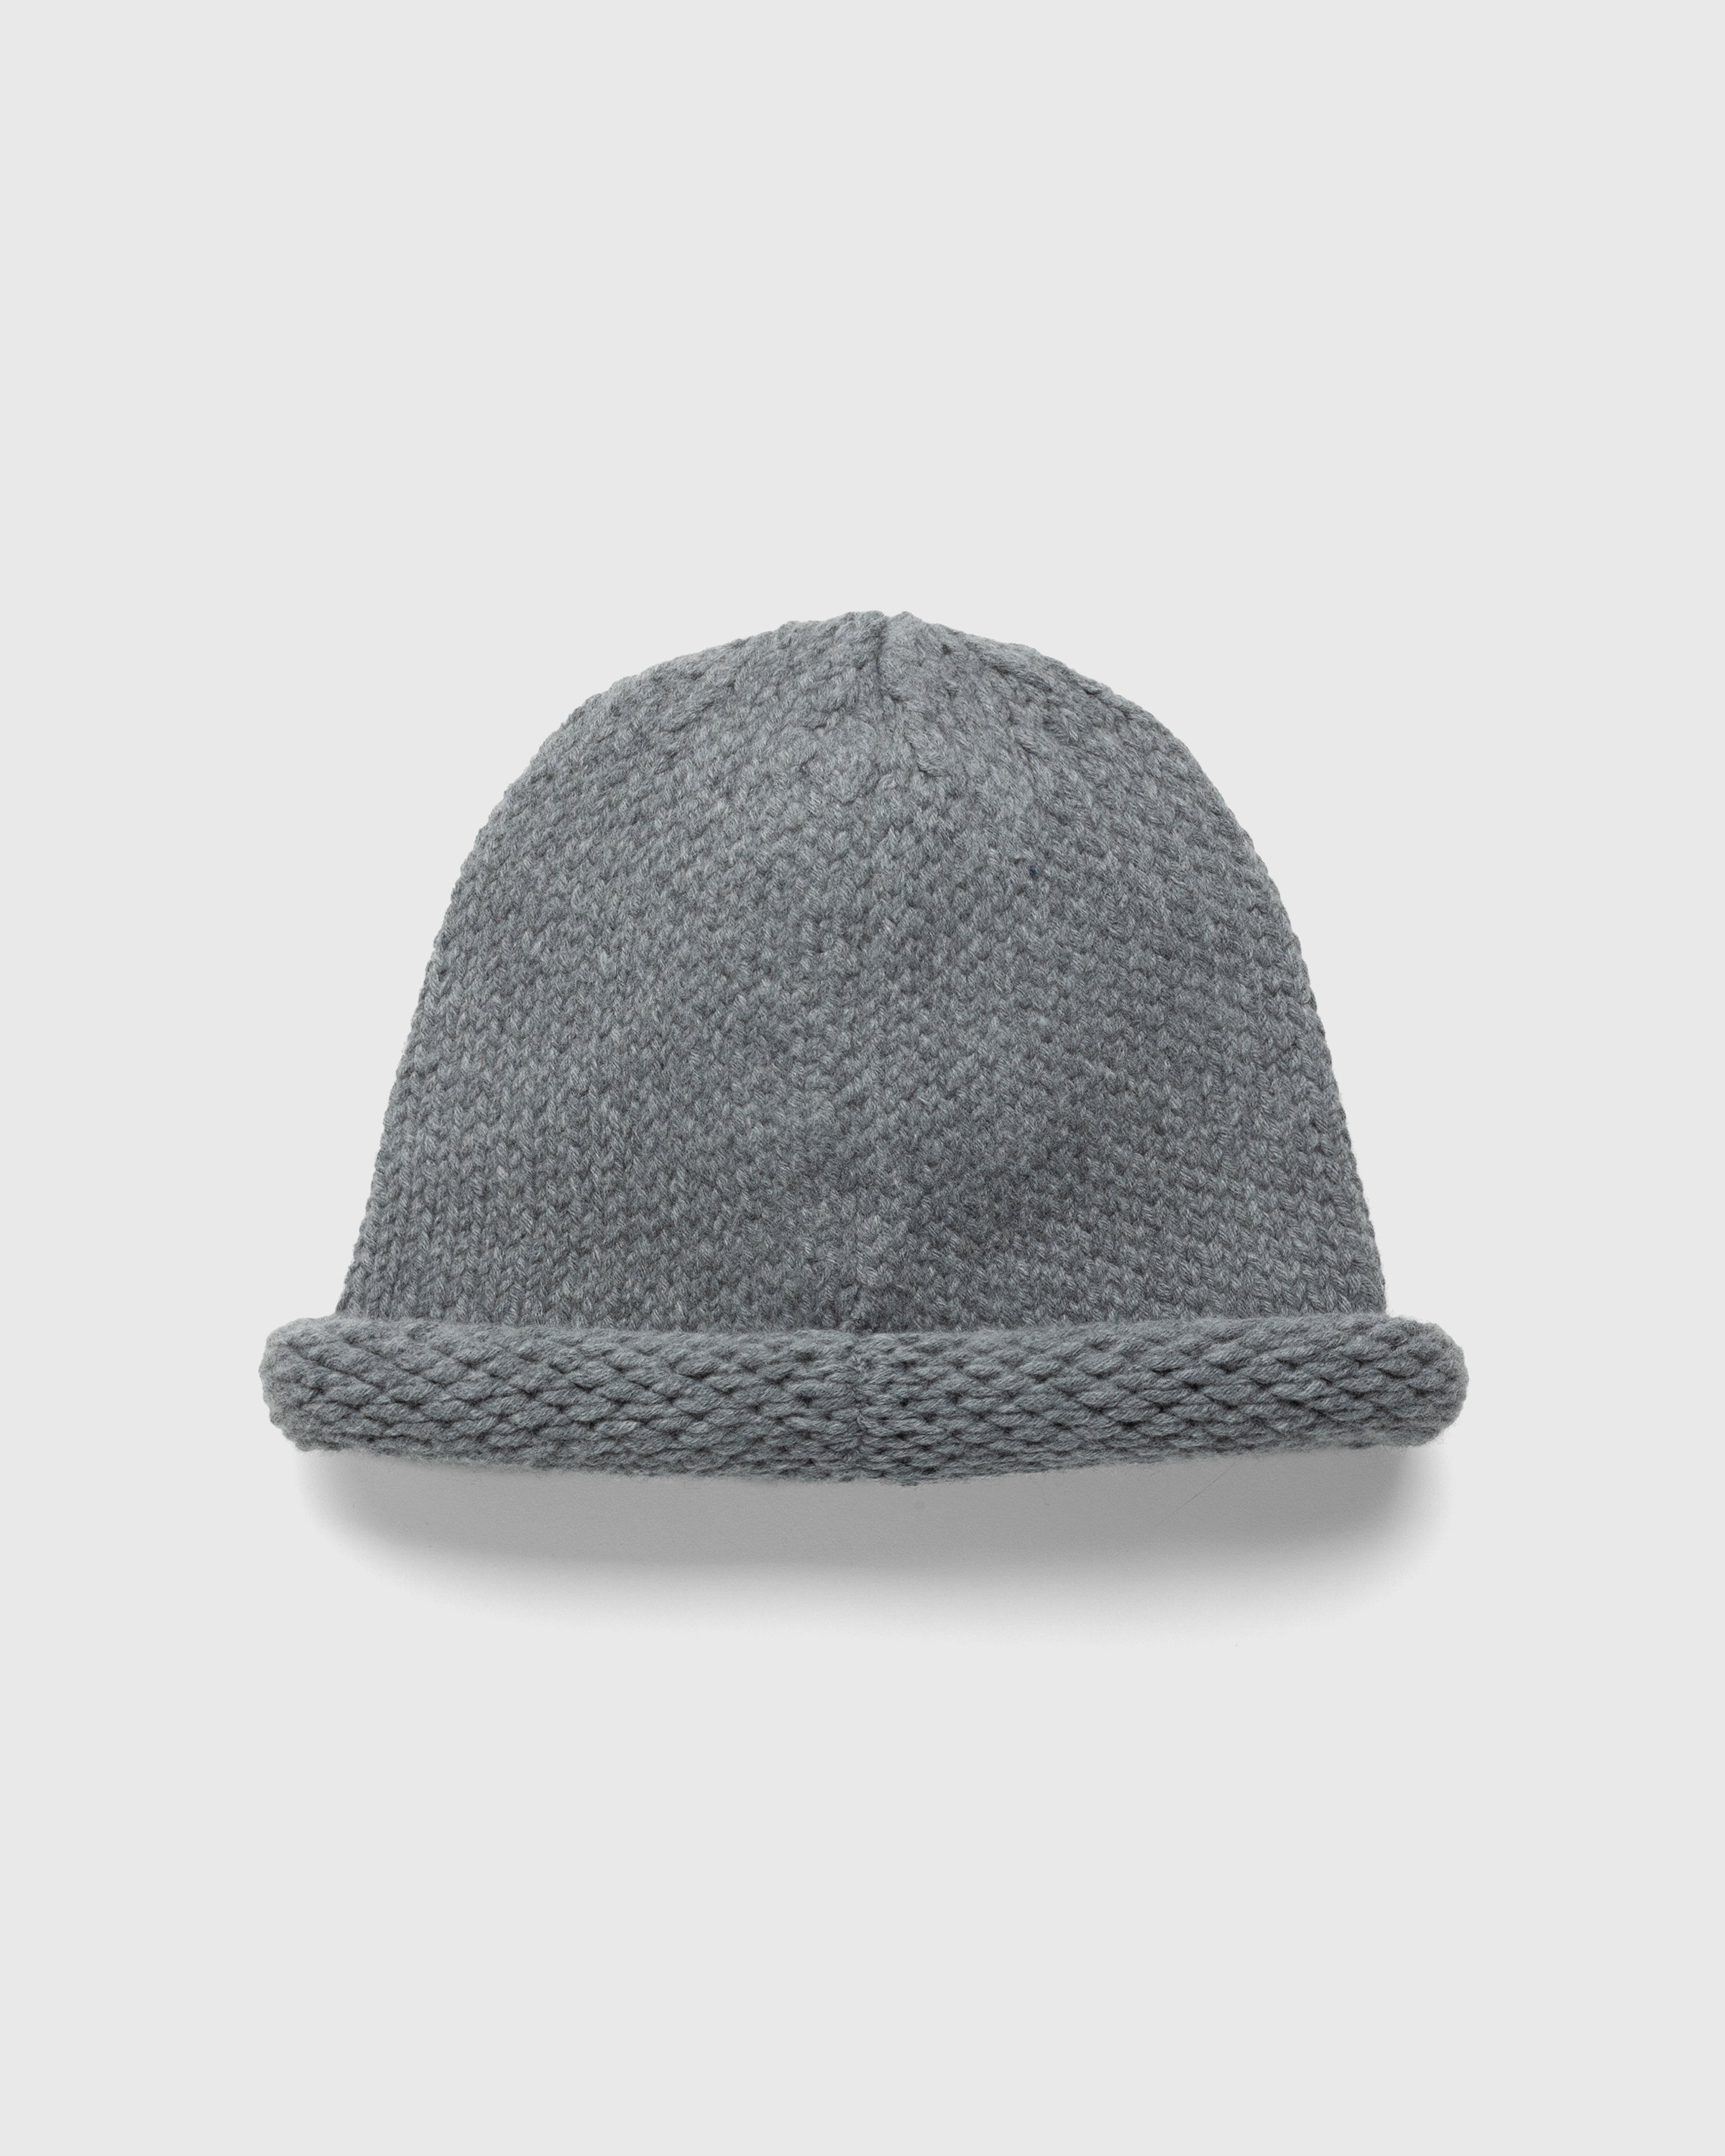 Kenzo - Wool Beanie Middle Grey - Accessories - Grey - Image 2